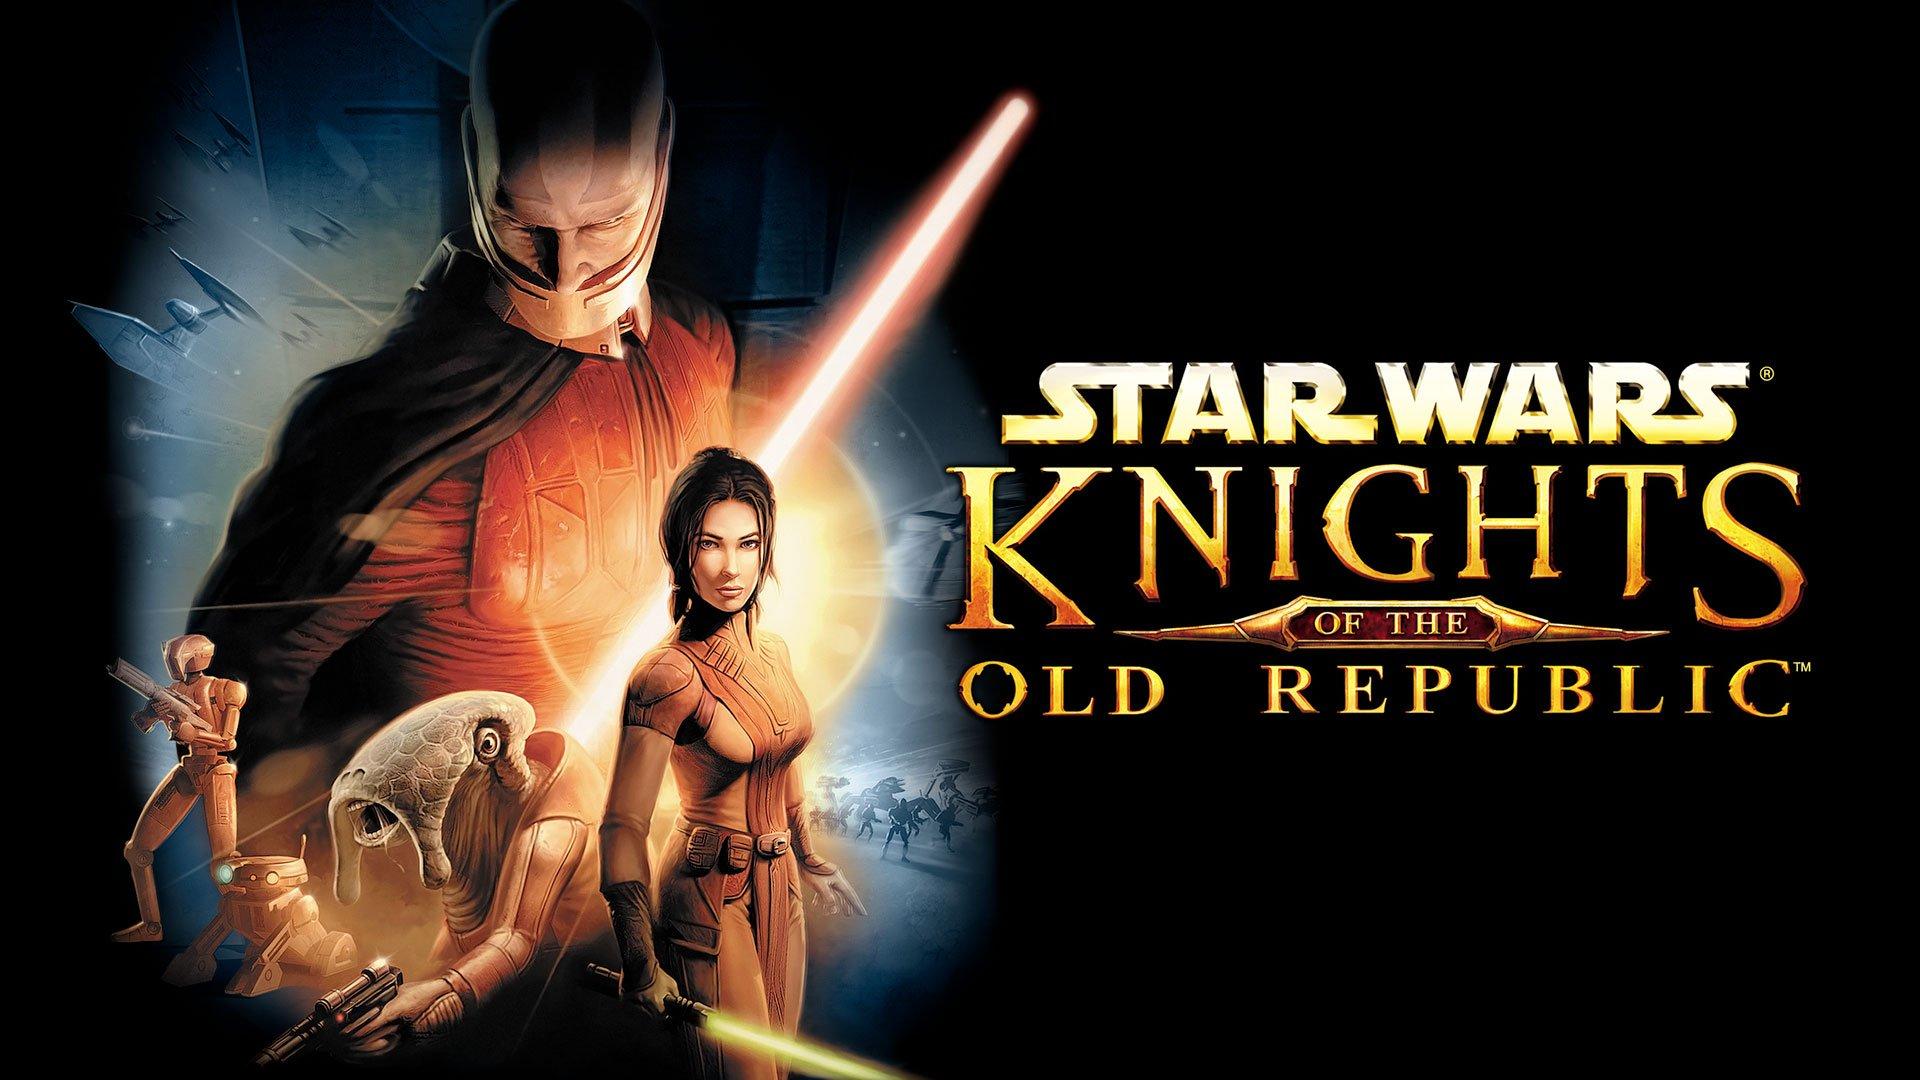 Stars Wars: Knights Of The Old Republic - Menos Fios